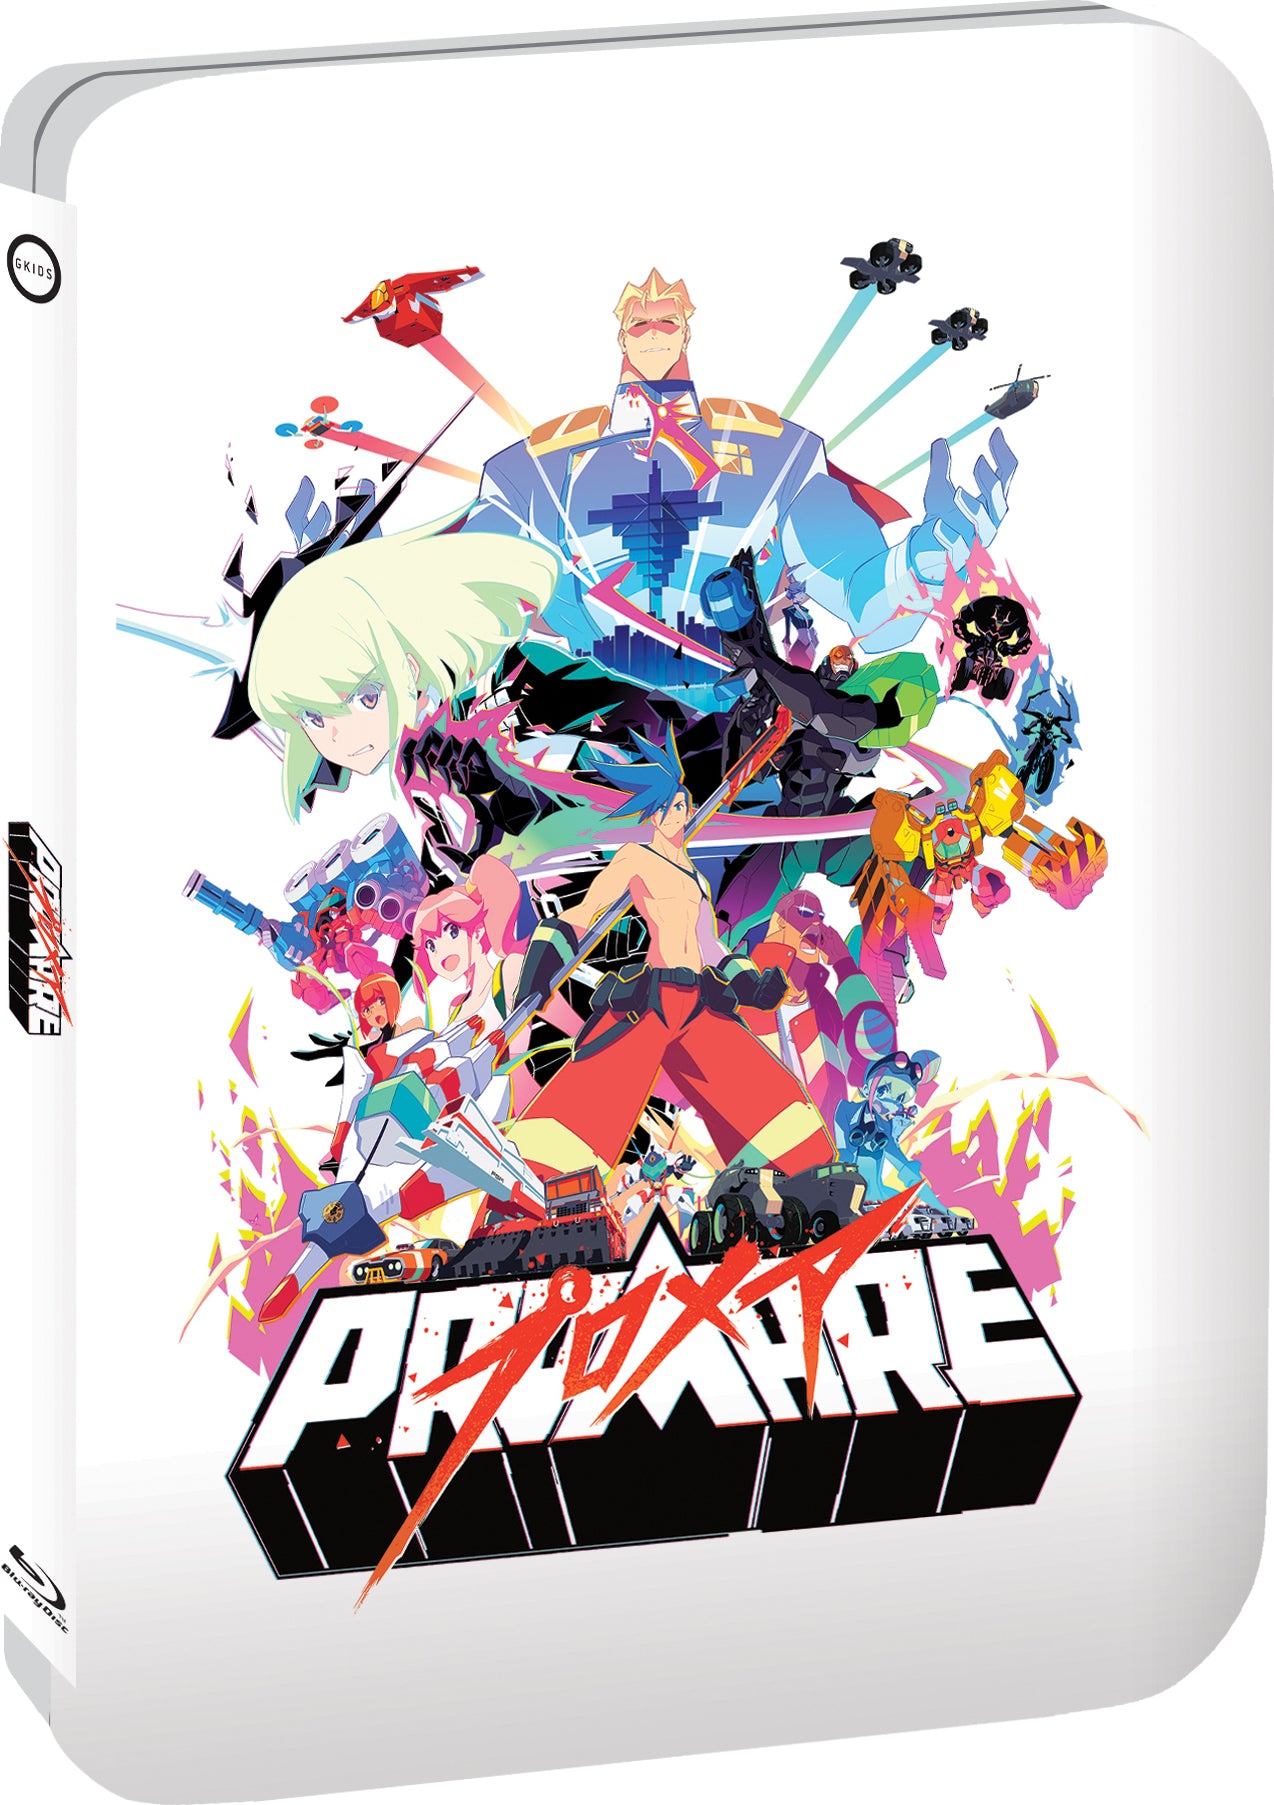 PROMARE (LIMITED EDITION) BLU-RAY/DVD STEELBOOK [SCRATCH AND DENT]